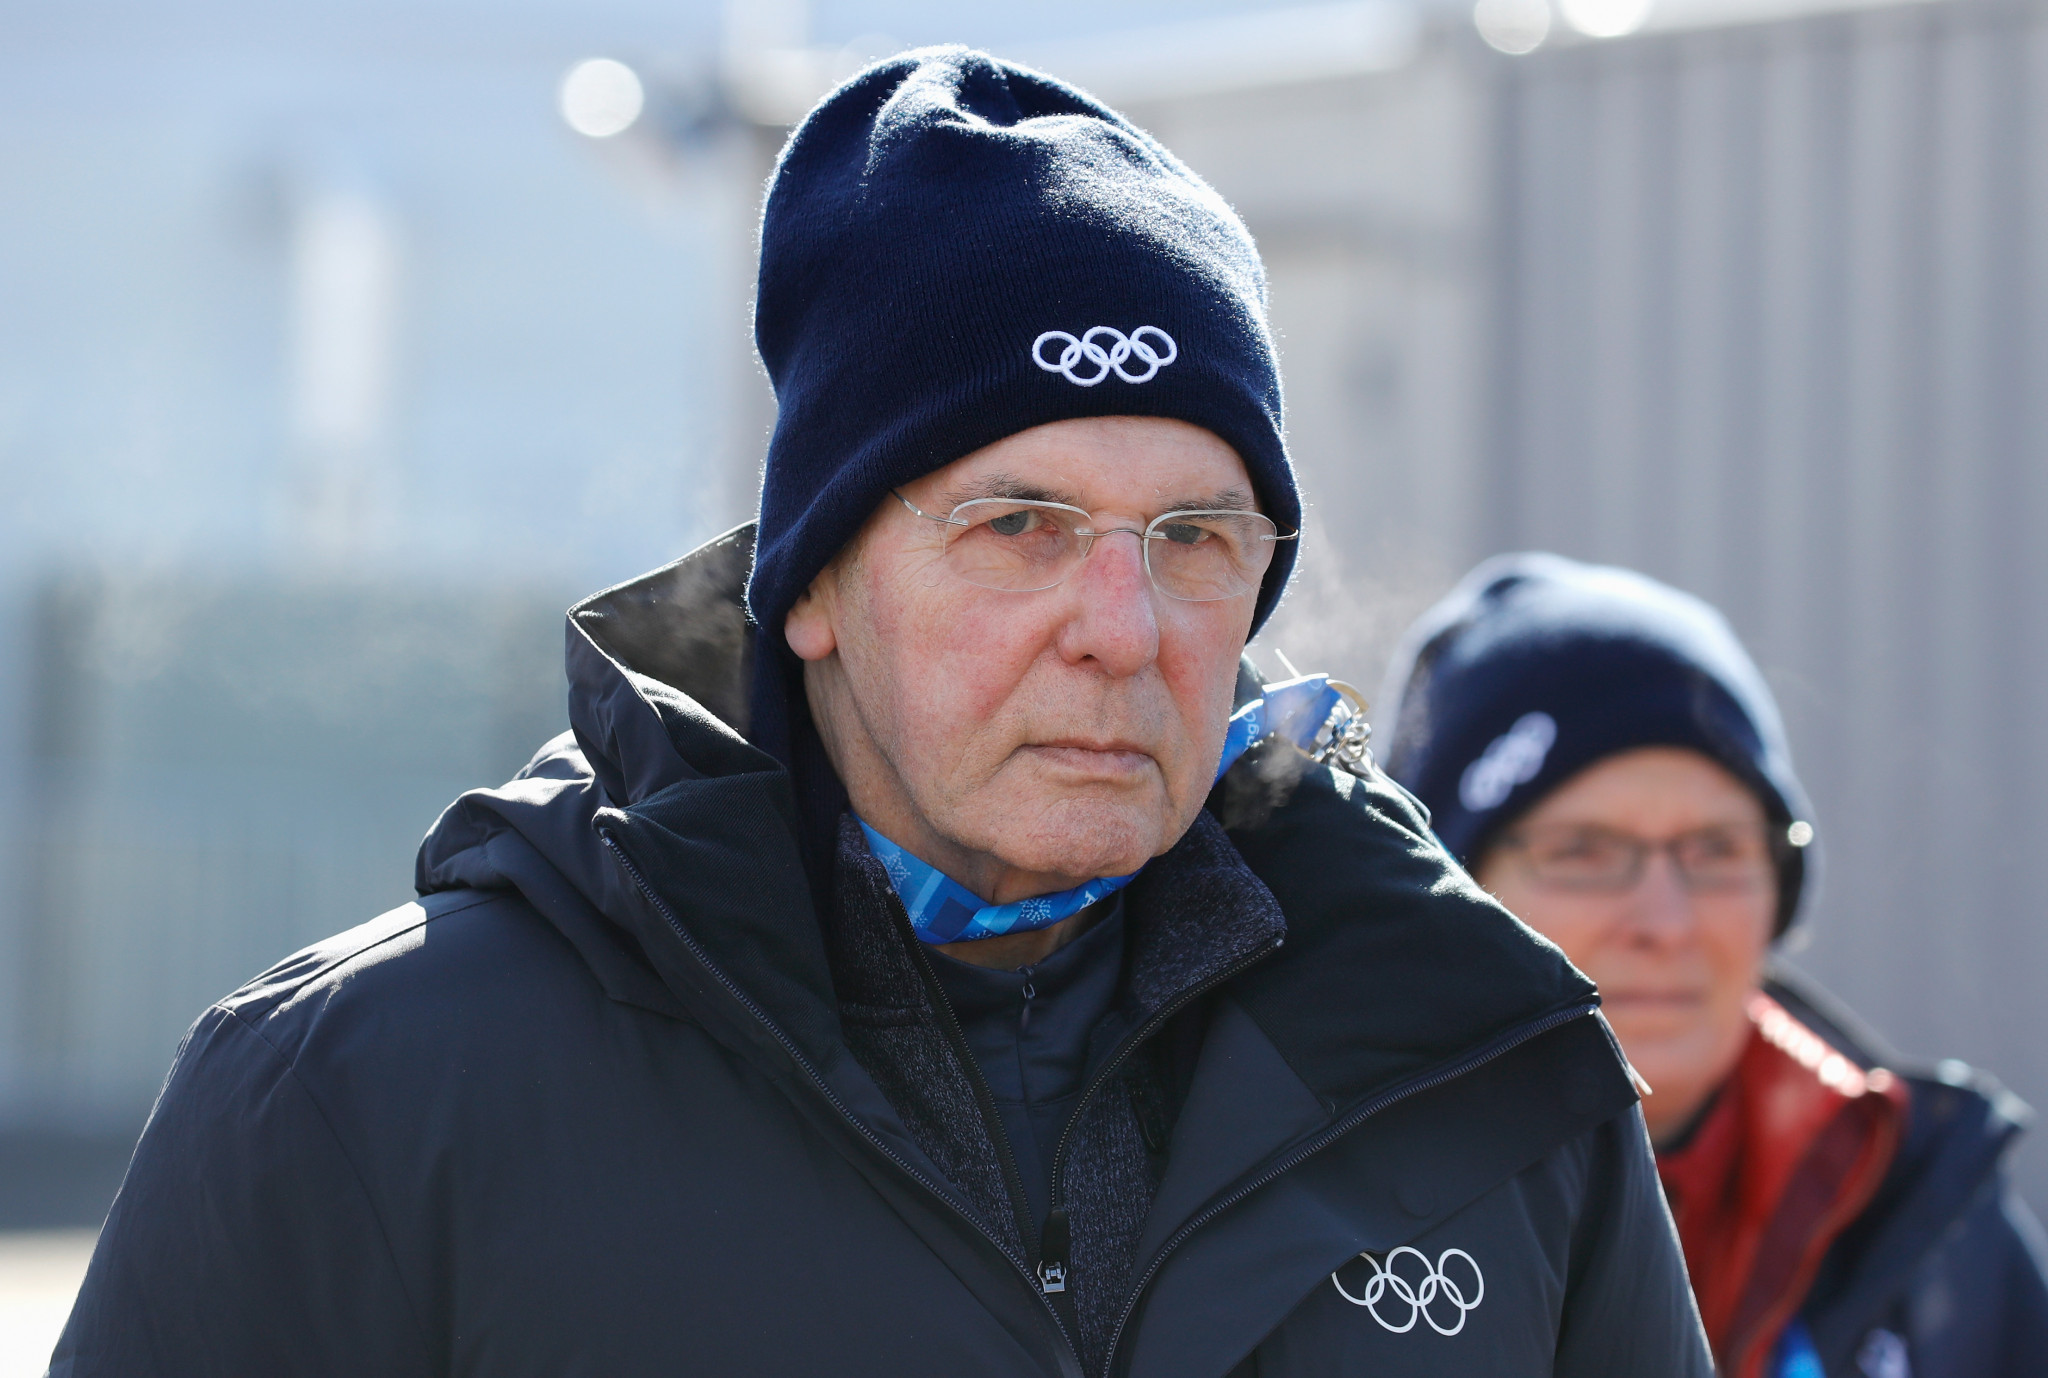 AIOWF pays tribute to "Olympic visionary" Rogge